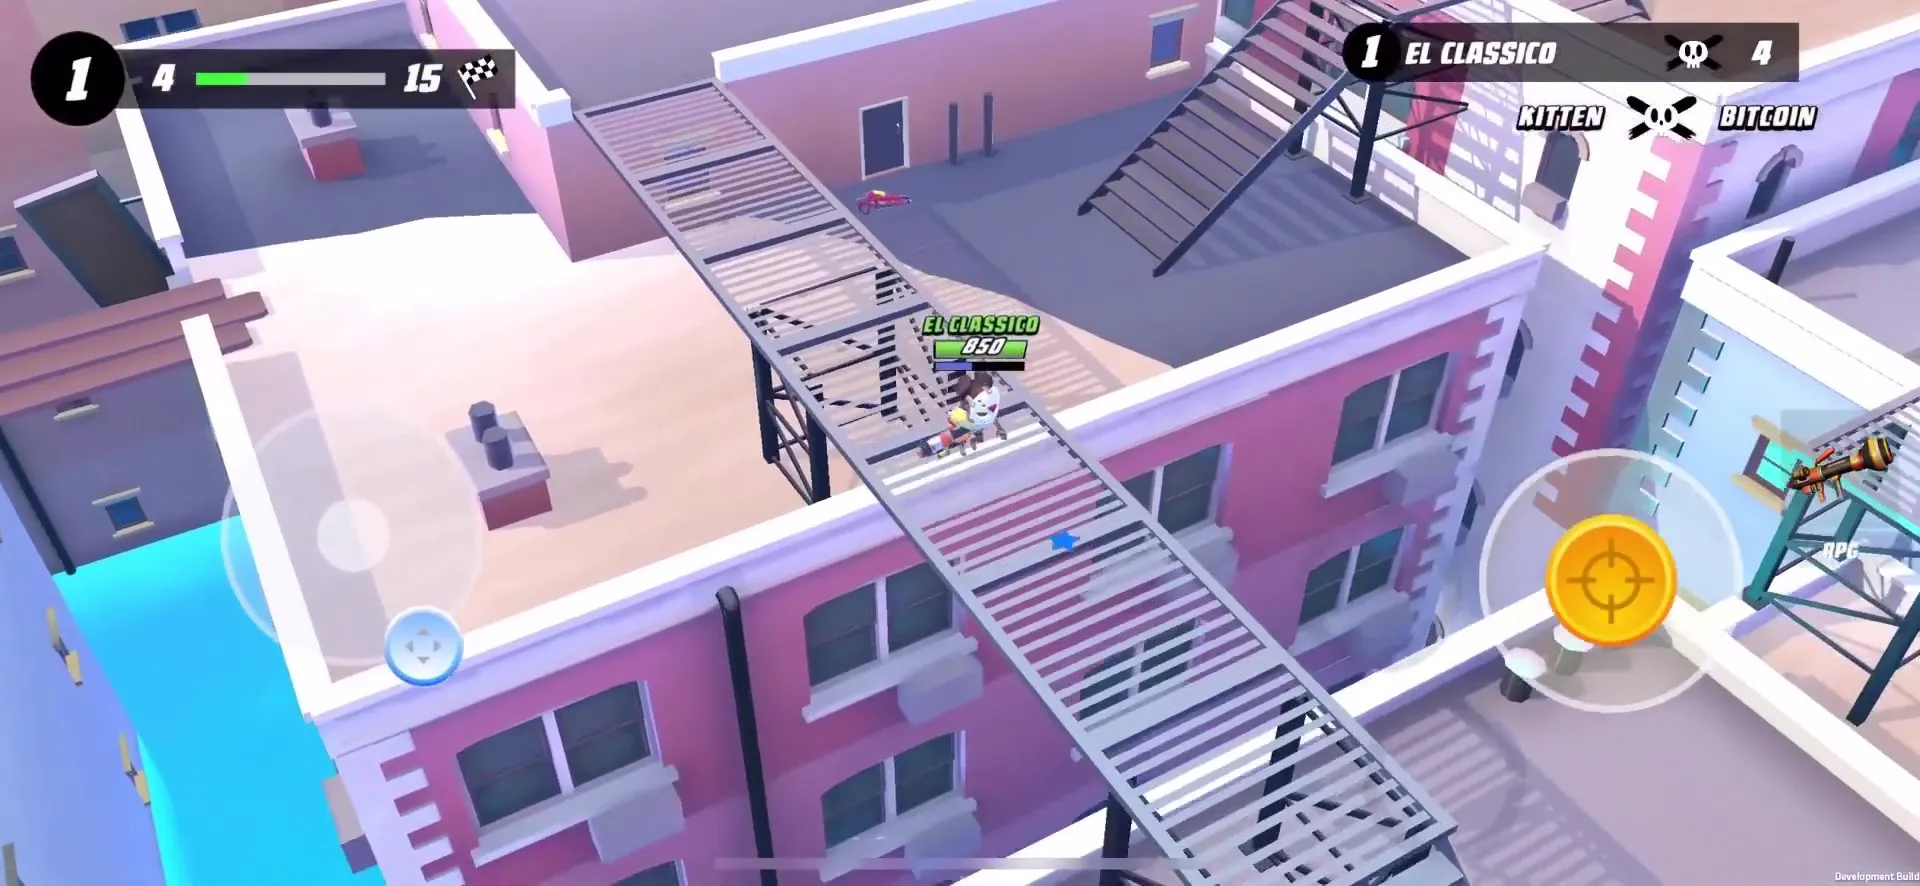 Blast Royale game screen shows a character crossing a roof bridge.The top right shows the number of kills, while the controls are at the bottom left and right of the screen.